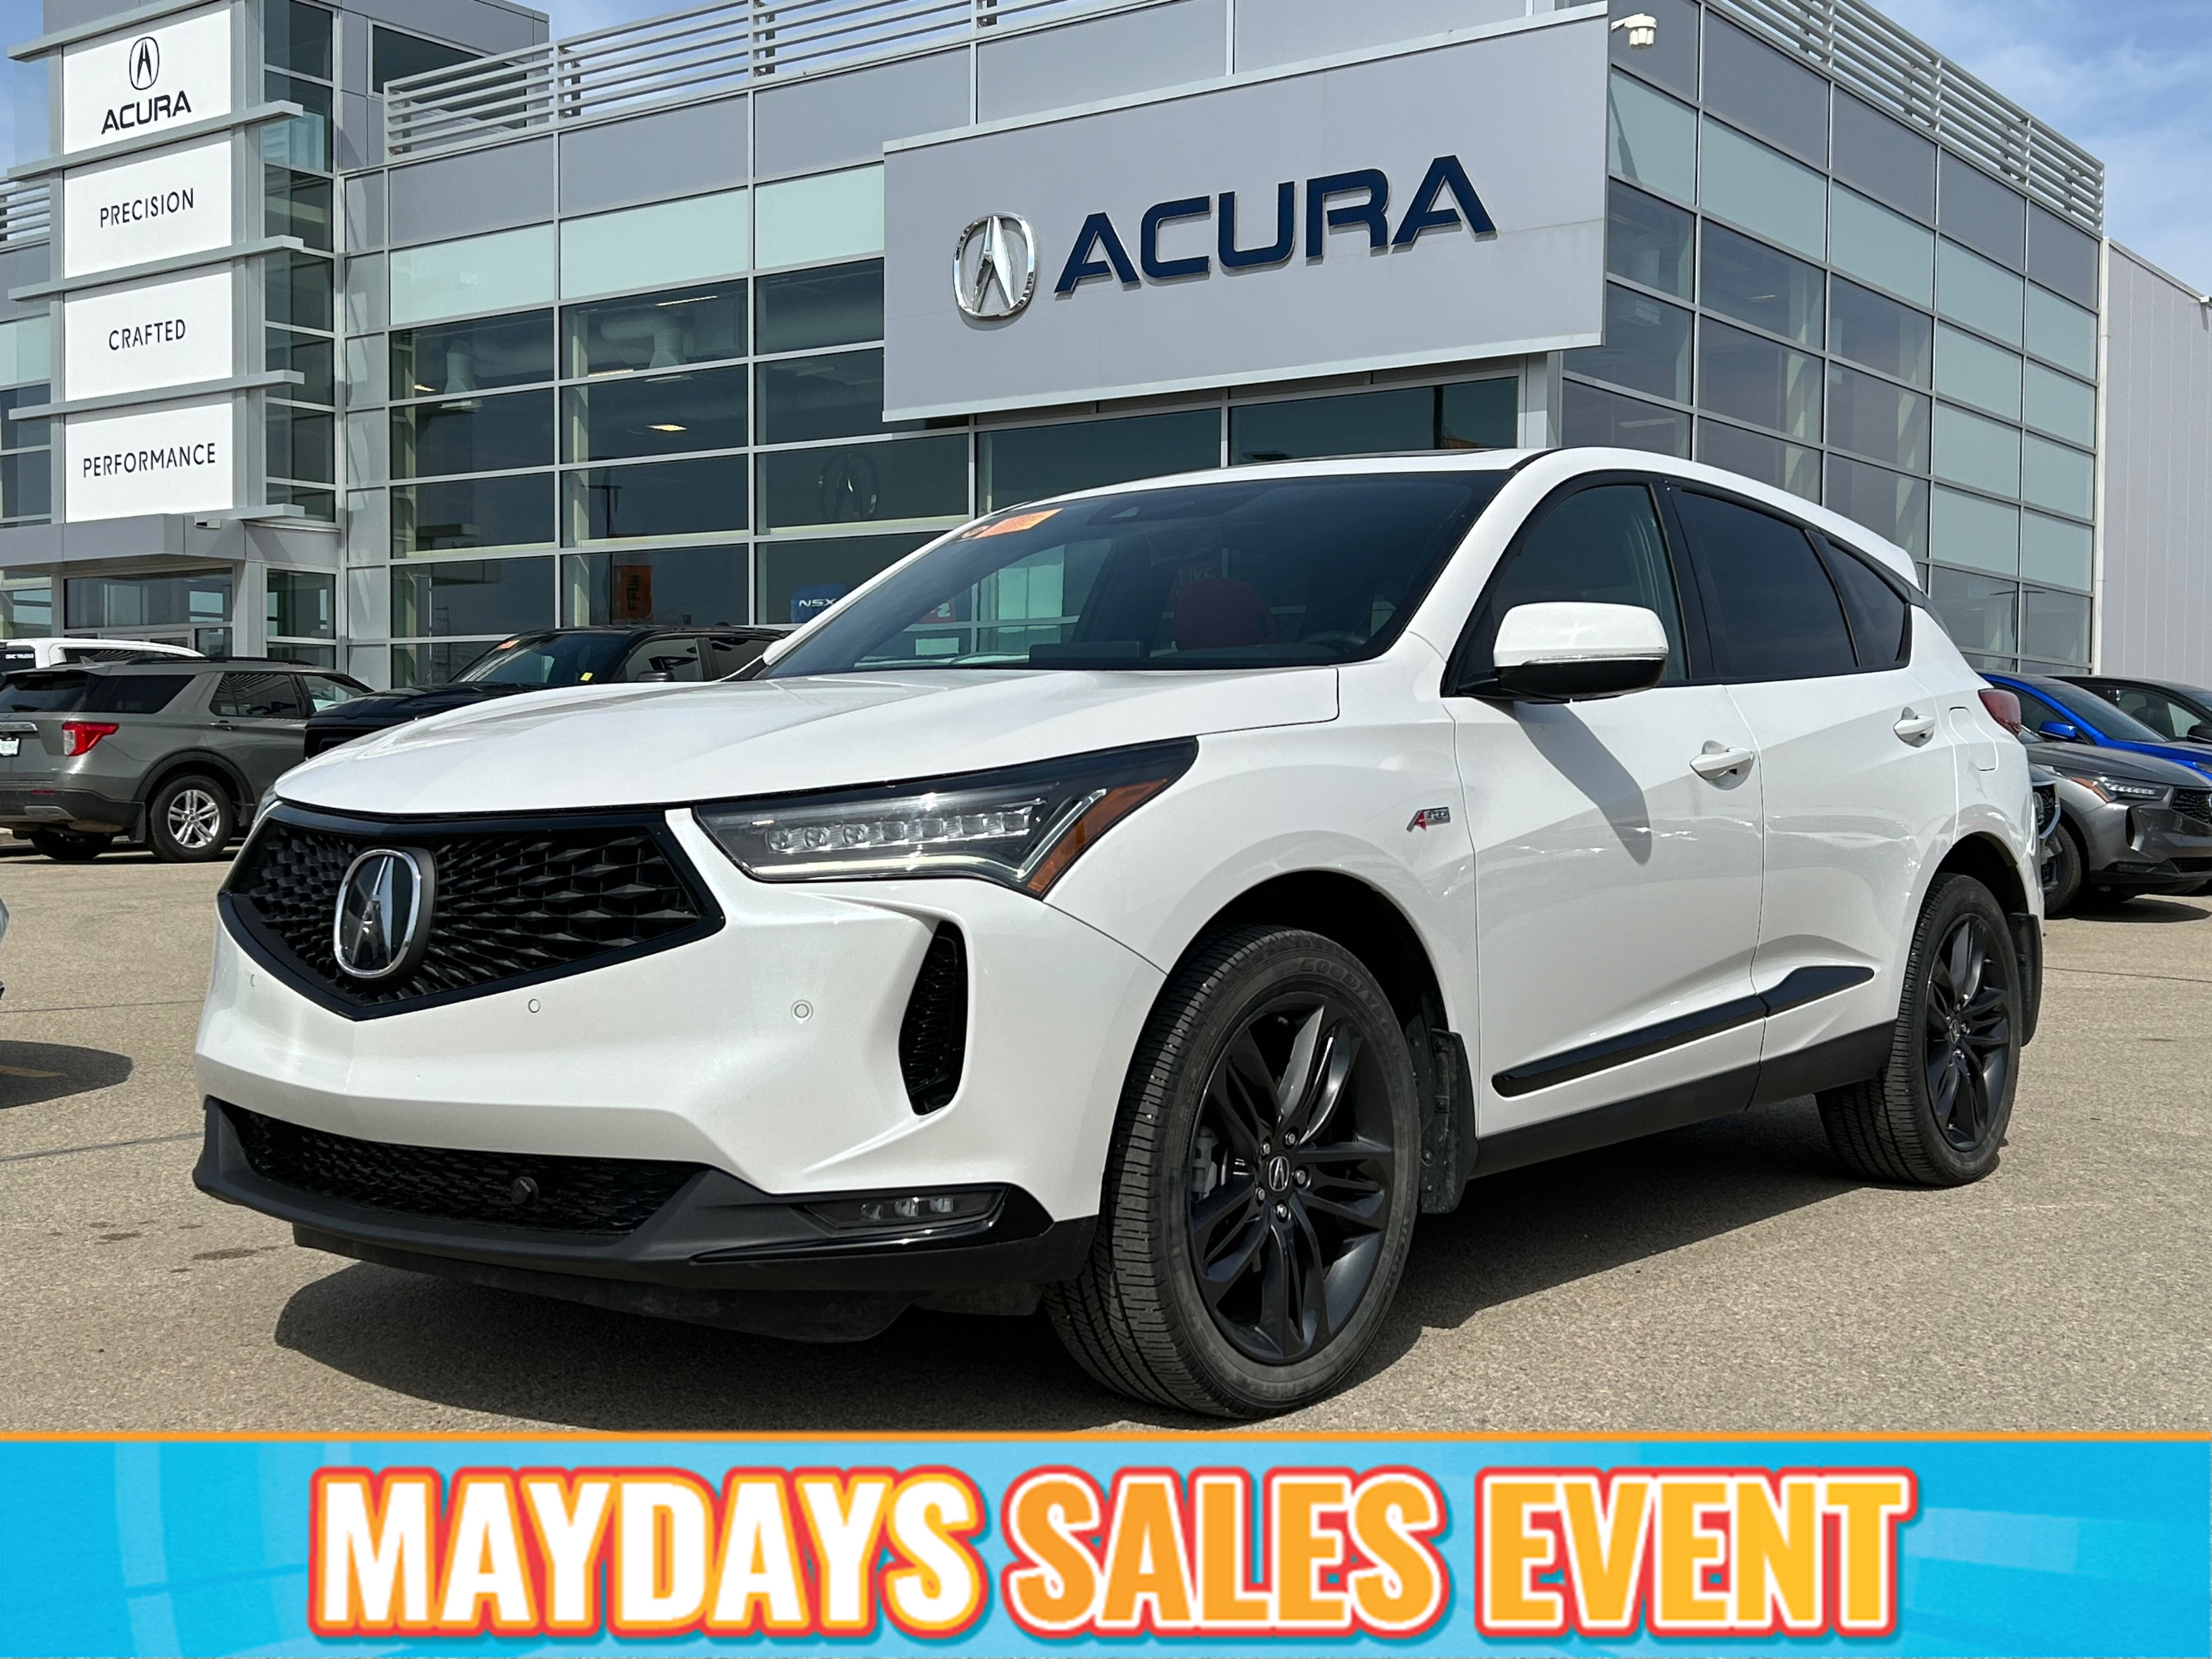 2022 Acura RDX perfect everyday commuter